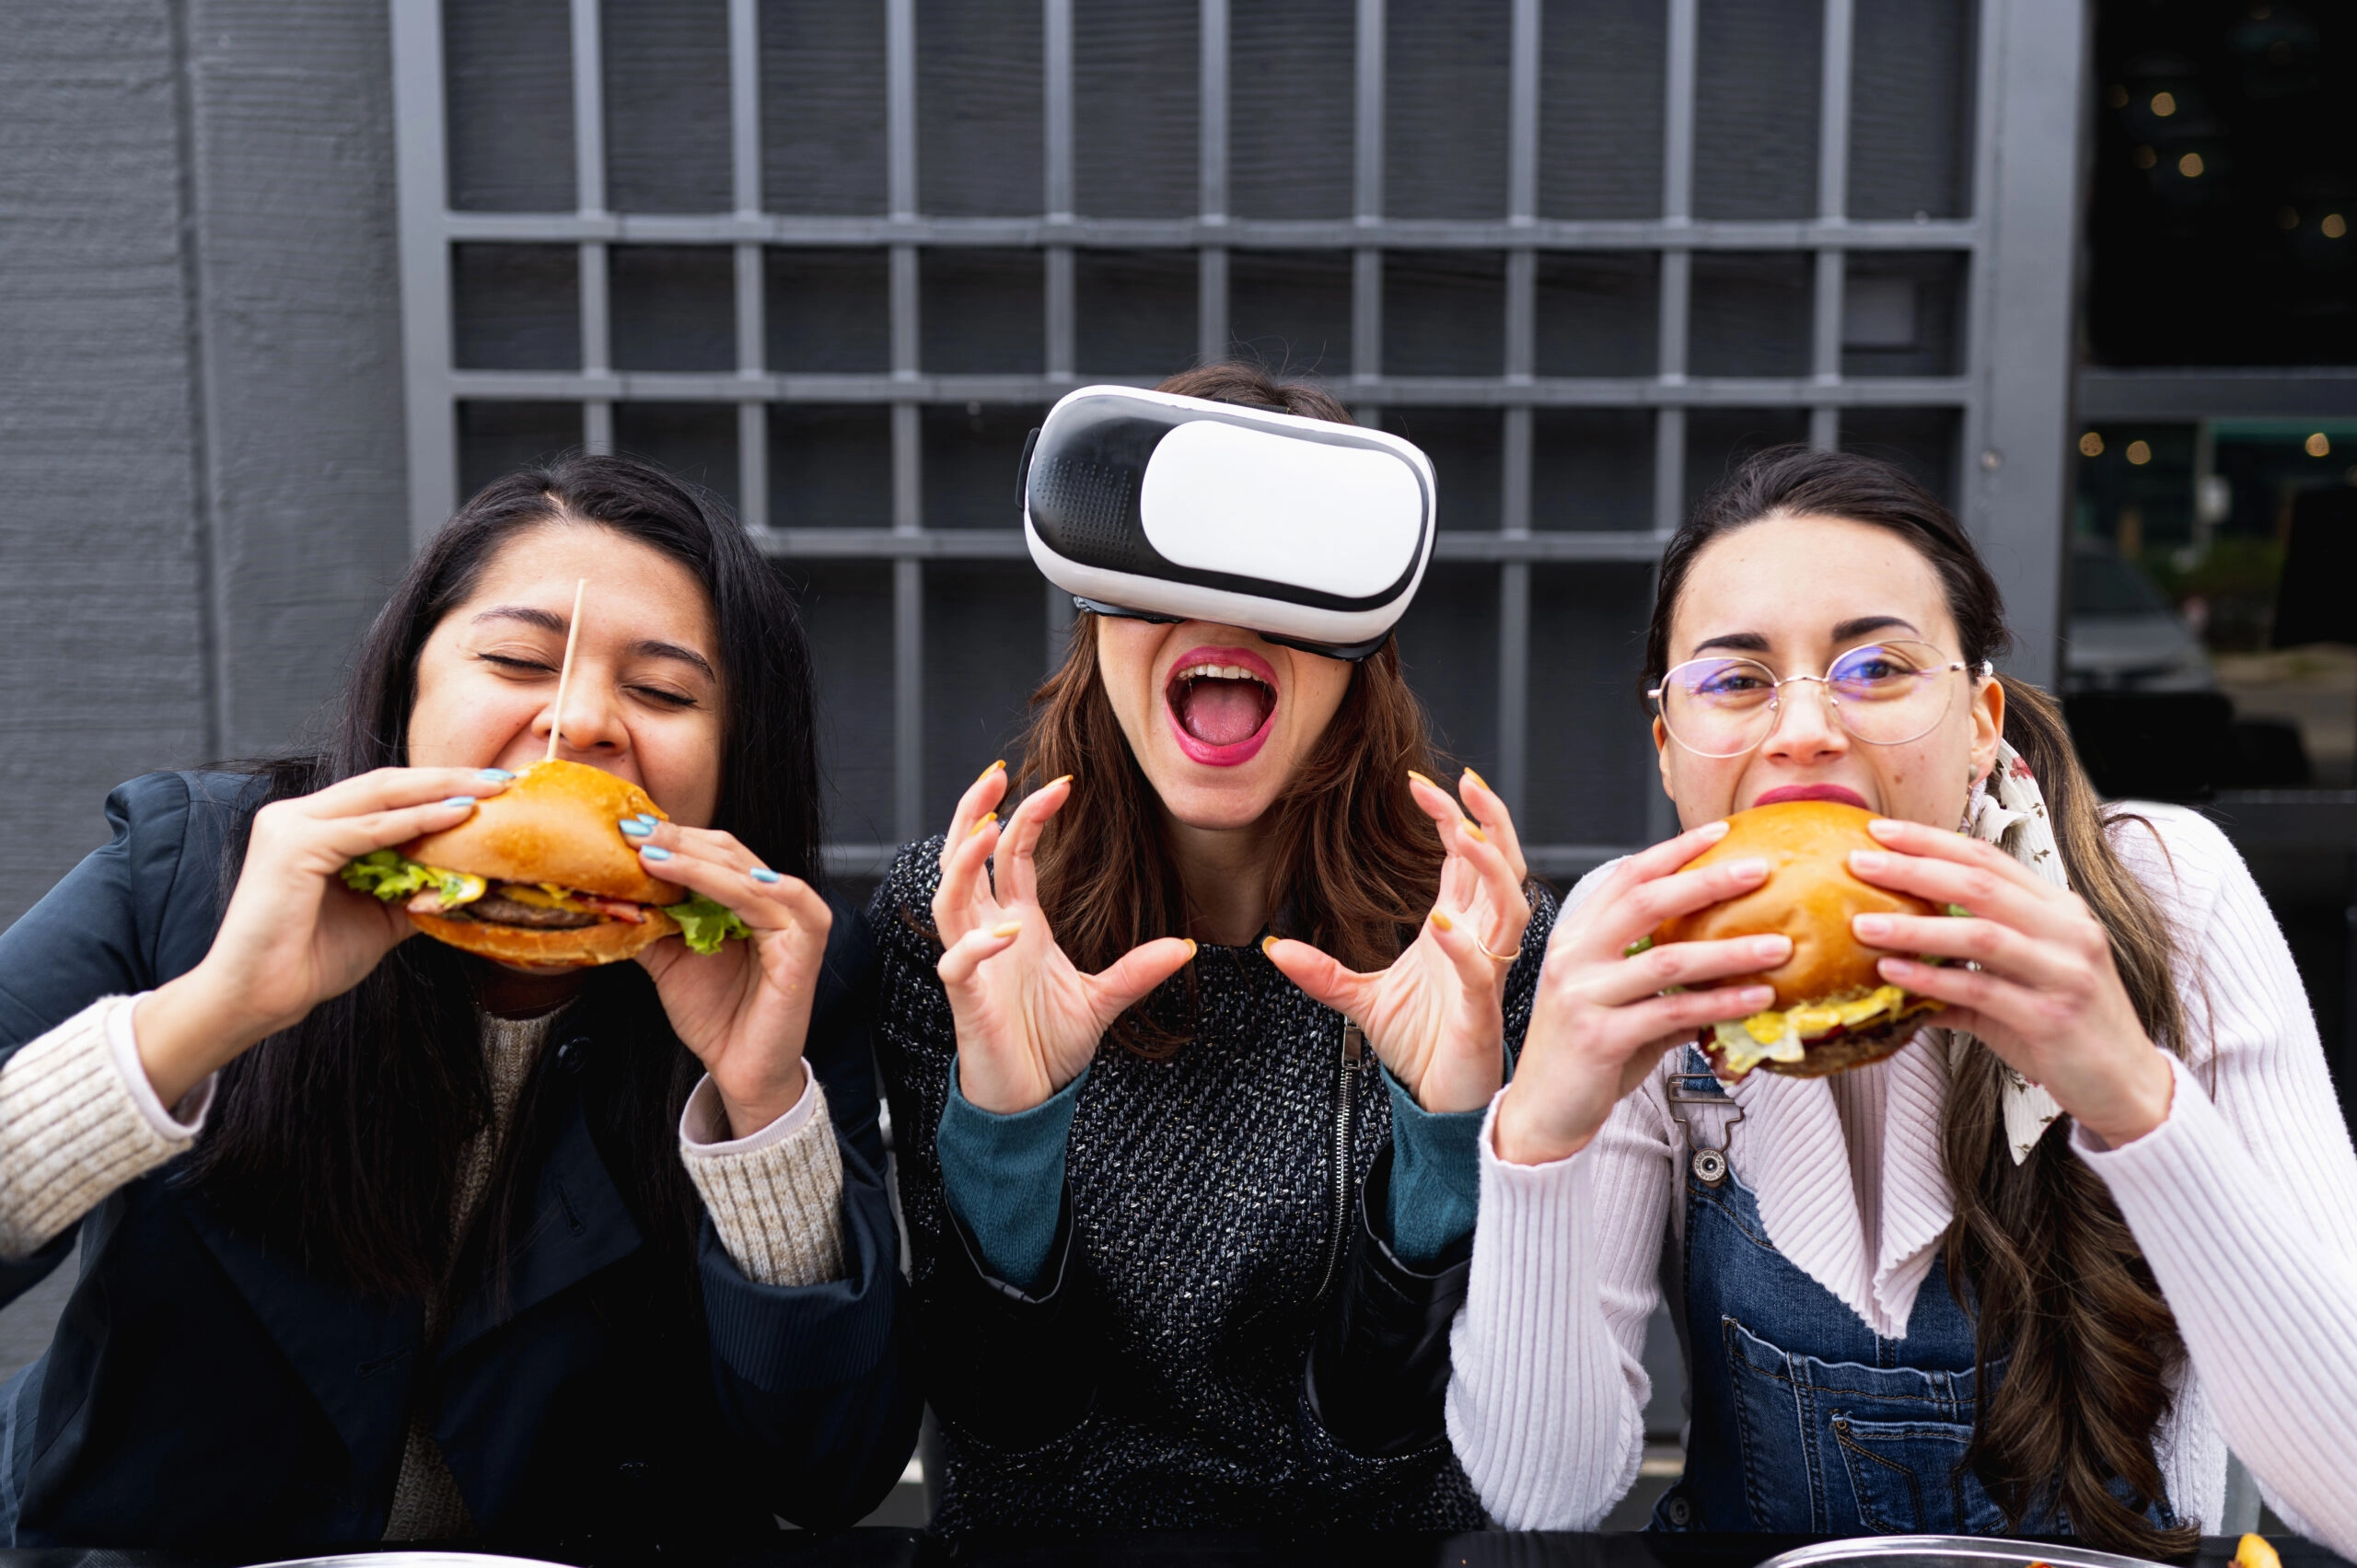 What Will it Mean for Restaurants to Enter the Metaverse?